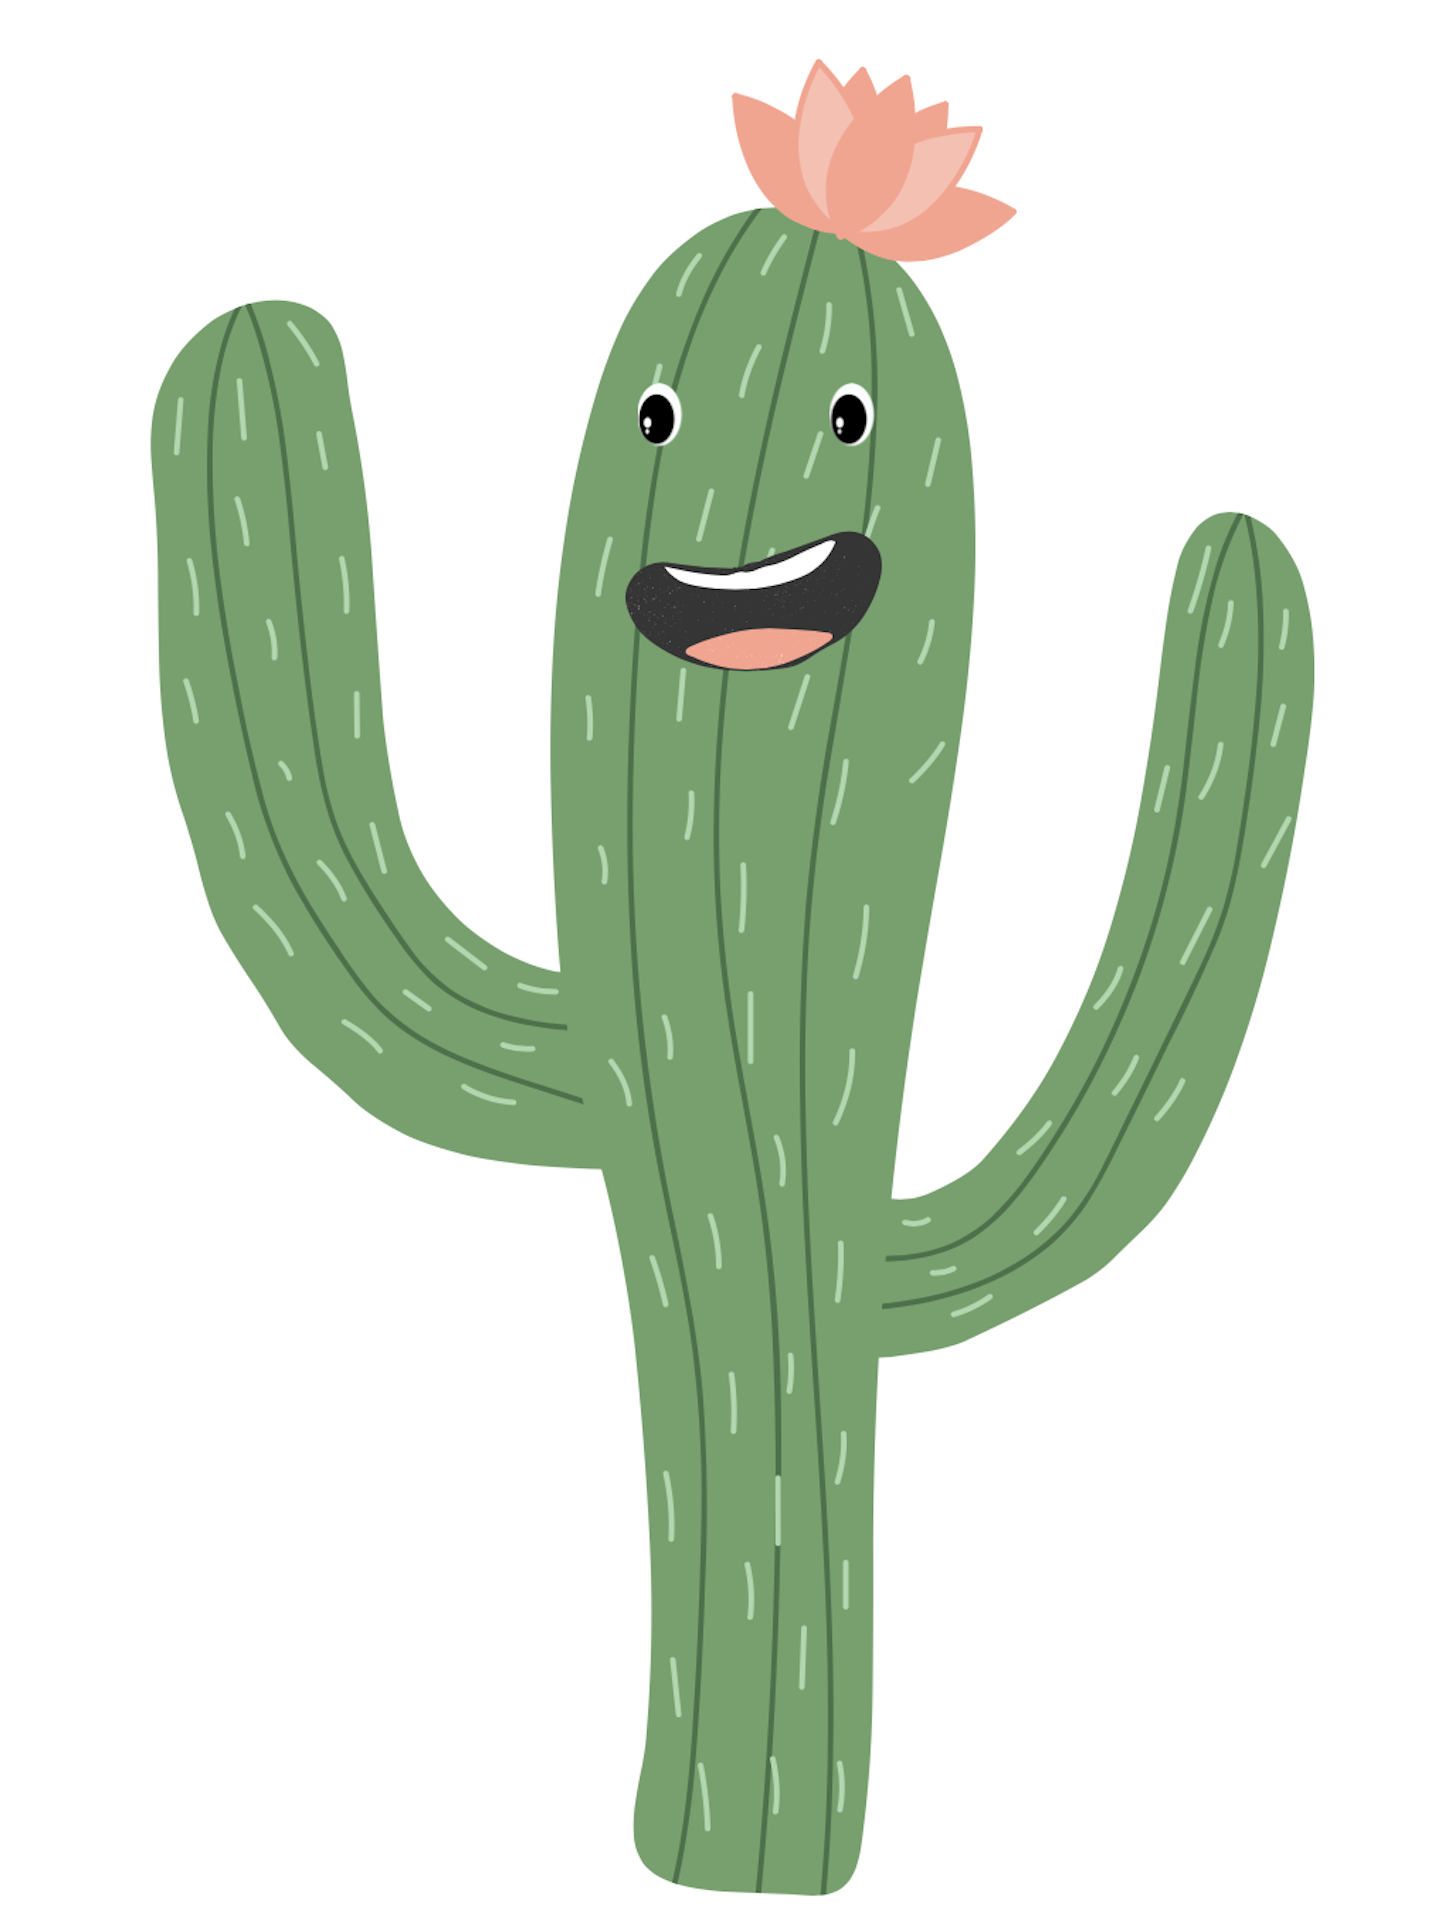 A cartoon graphic of a cactus with cartoon eyes and a wide smile. There is a flower used as a hat on its head.